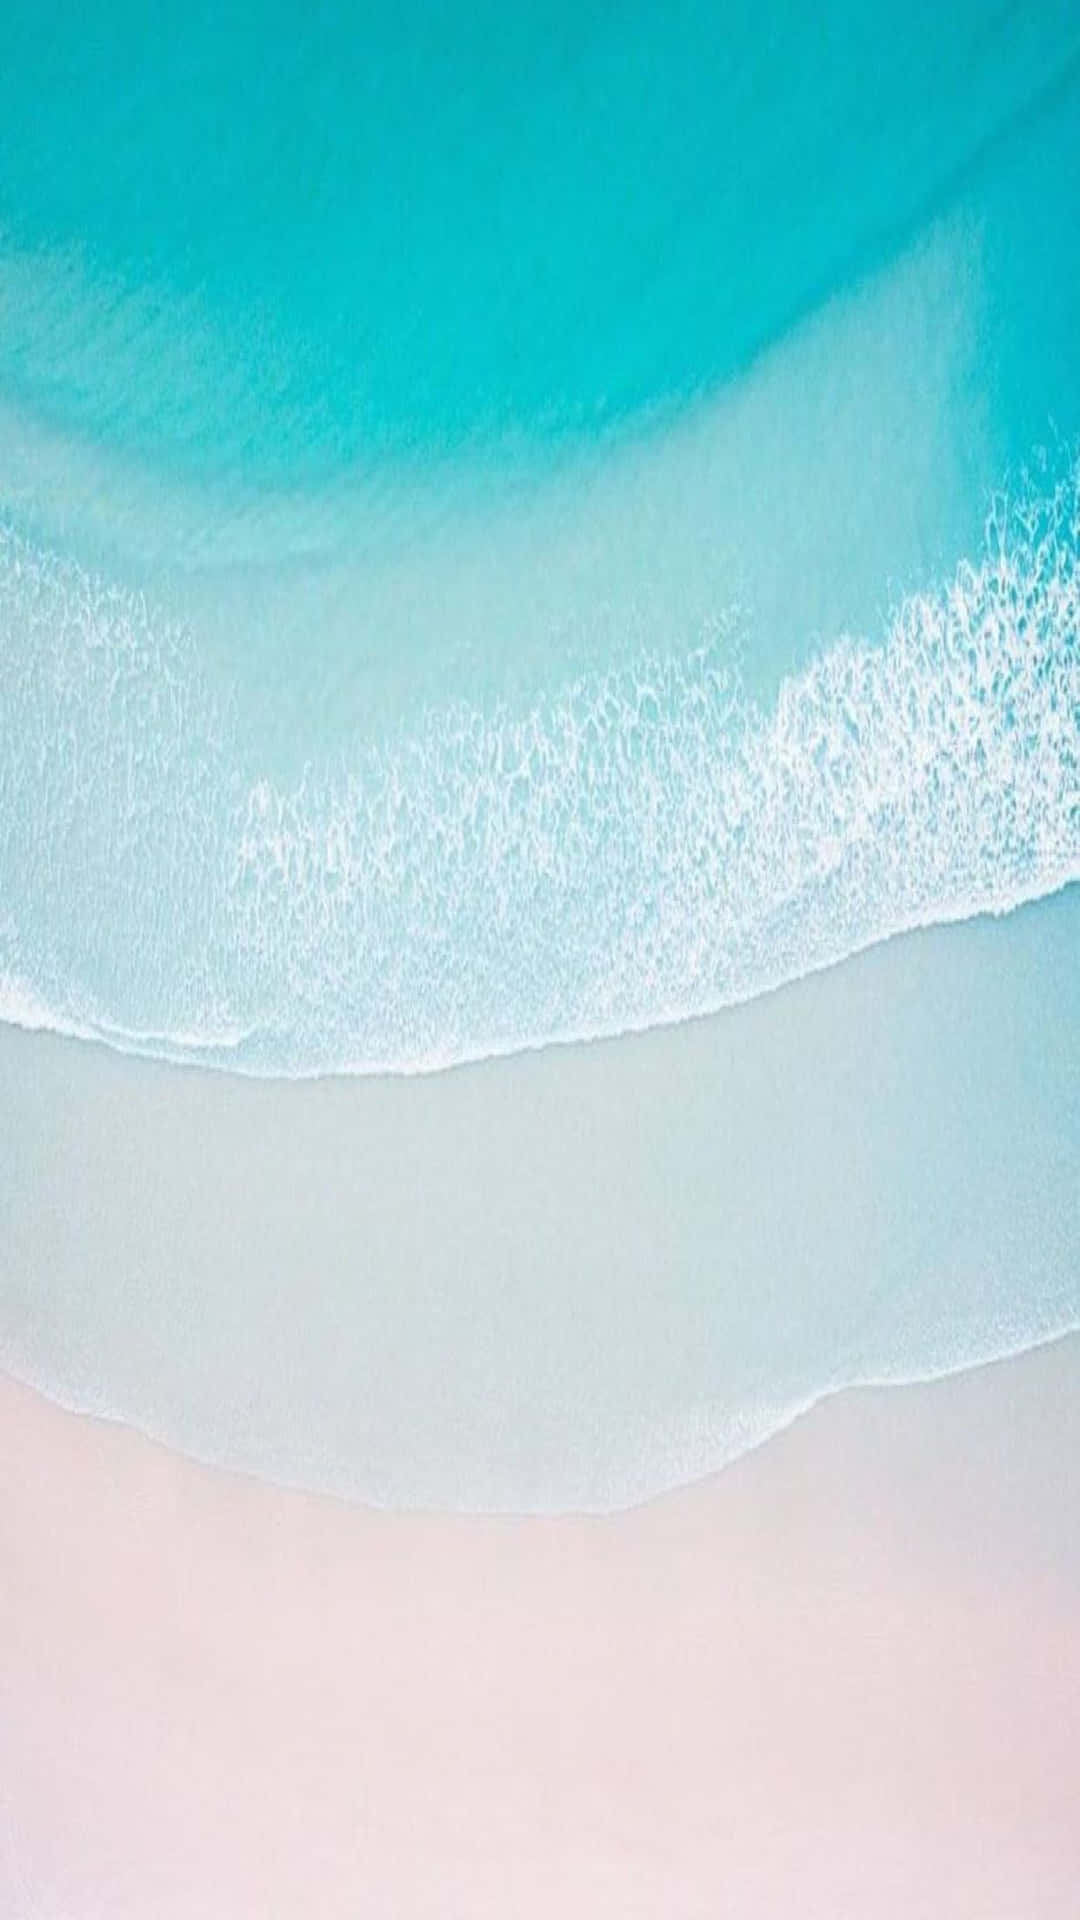 A Blue And White Beach With Waves Wallpaper